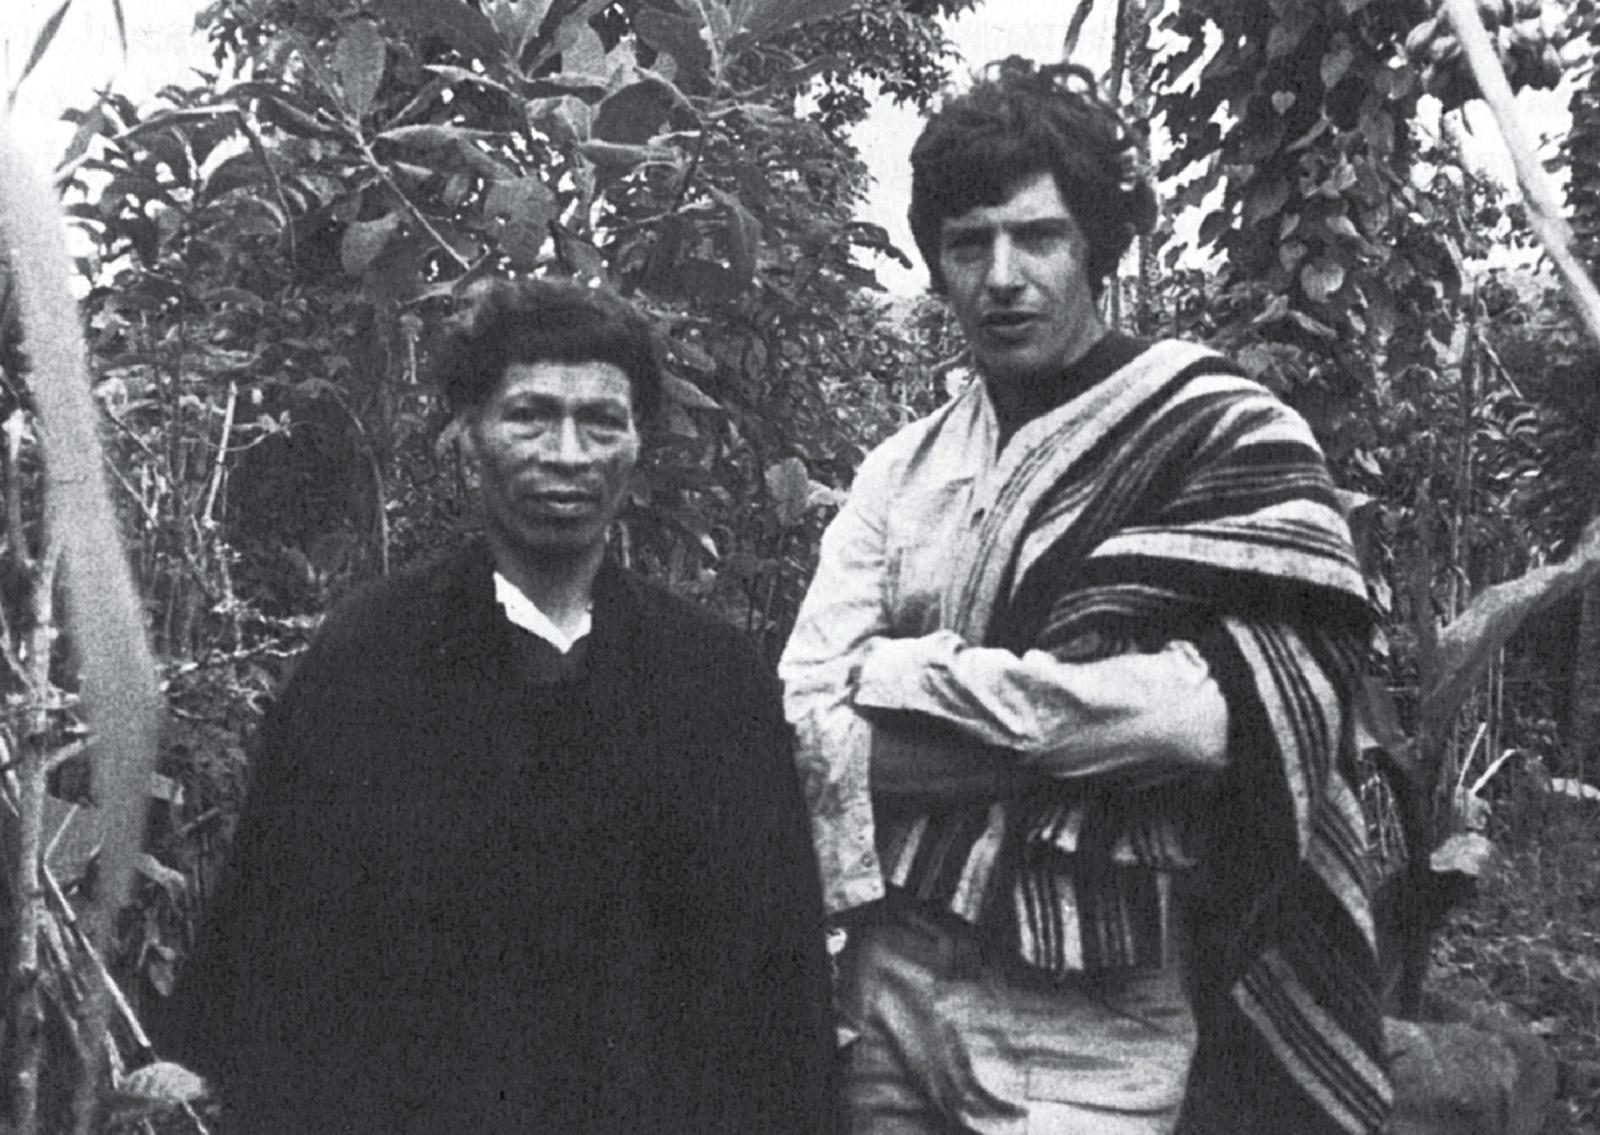 Michael Taussig in a garden with yagé vines with Don Pedro, an Indian
healer. Colombia, 1977.